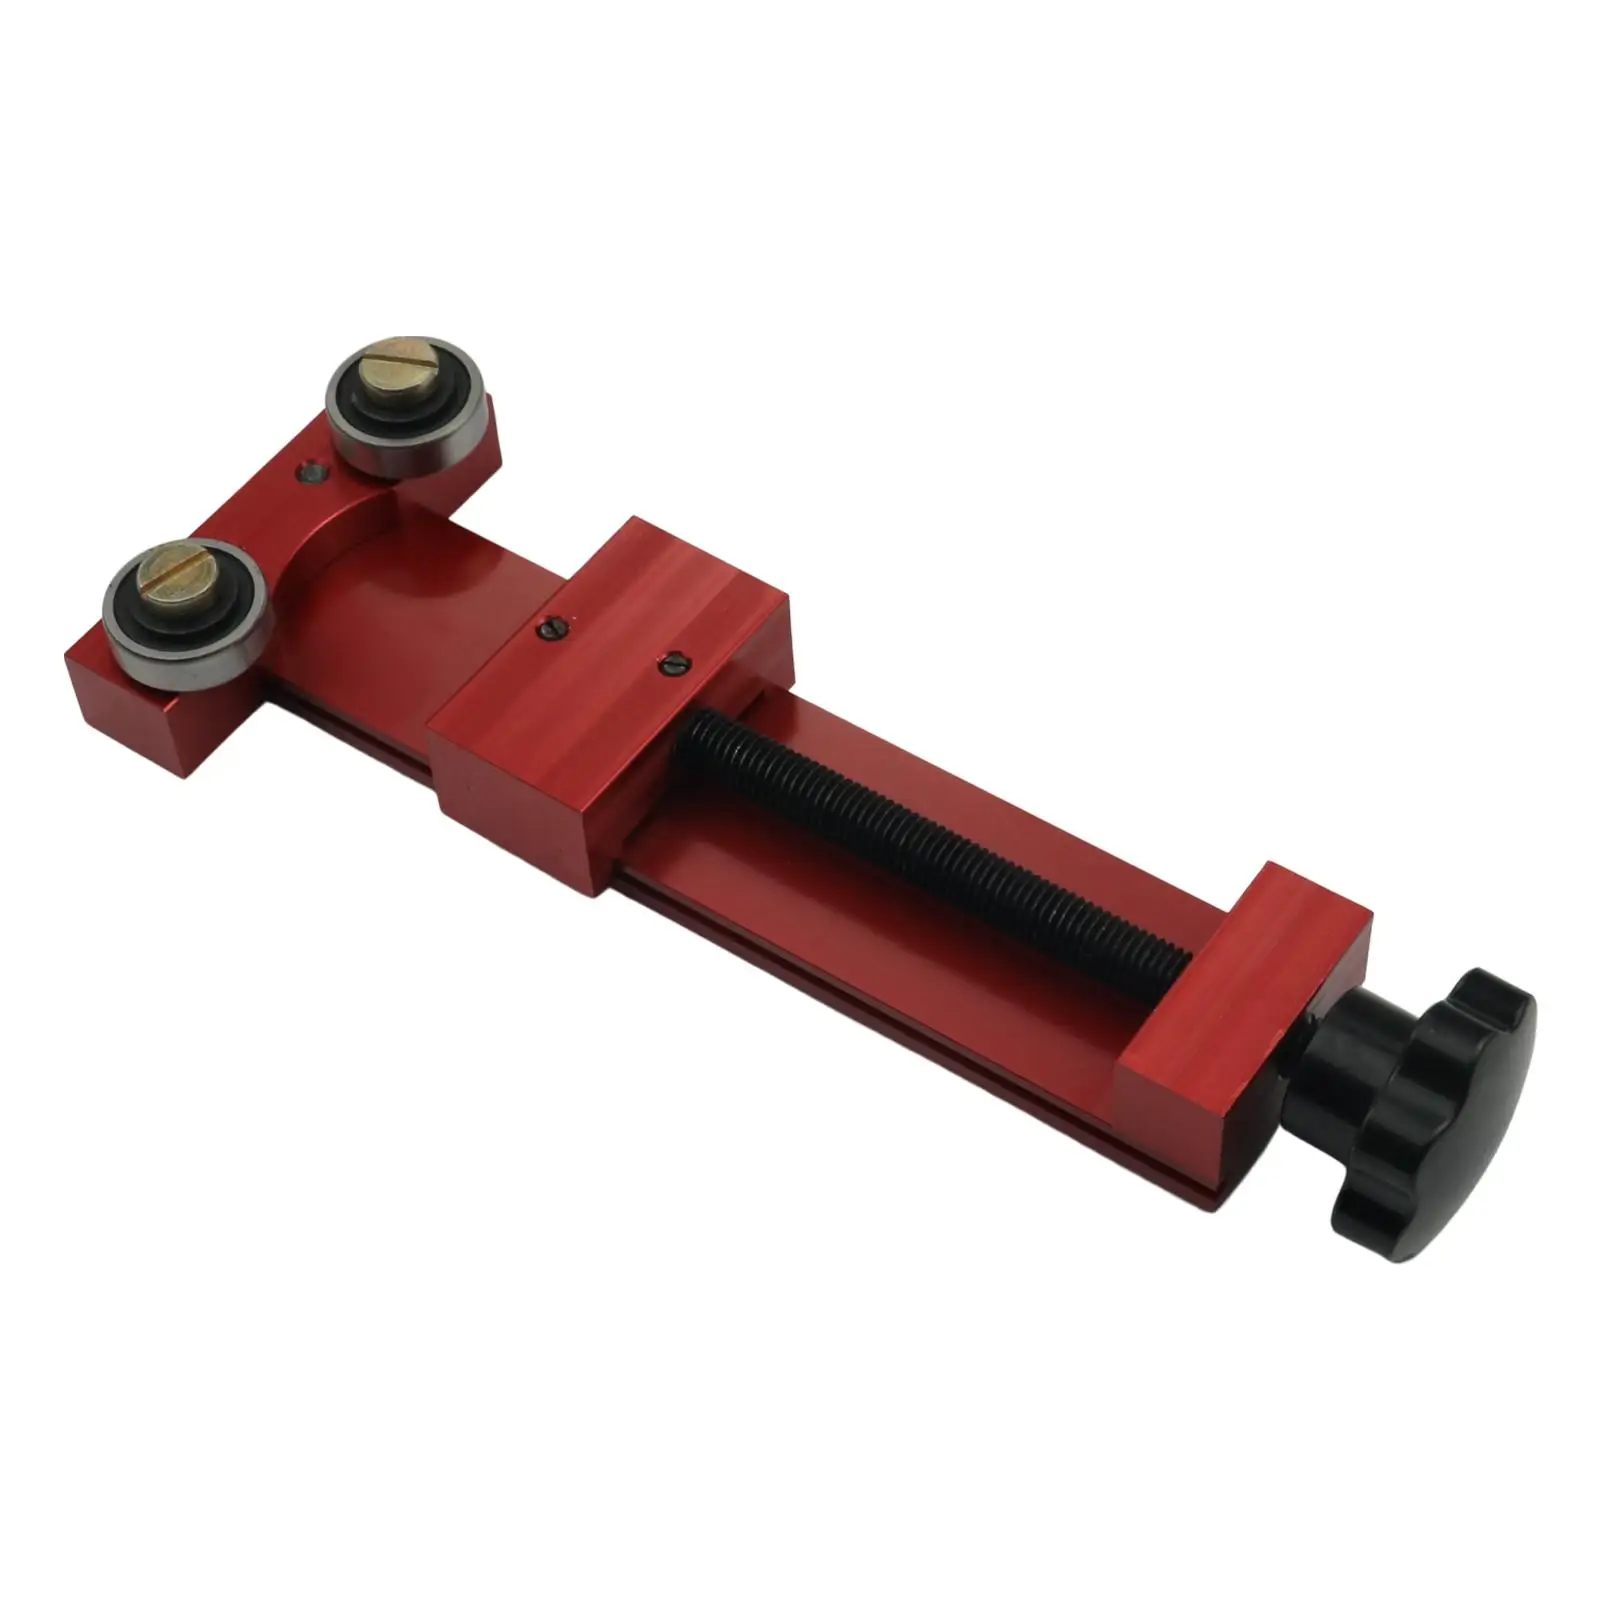 Oil Filter Cutter 66490 Red Attachment Accessories for Oil Filter